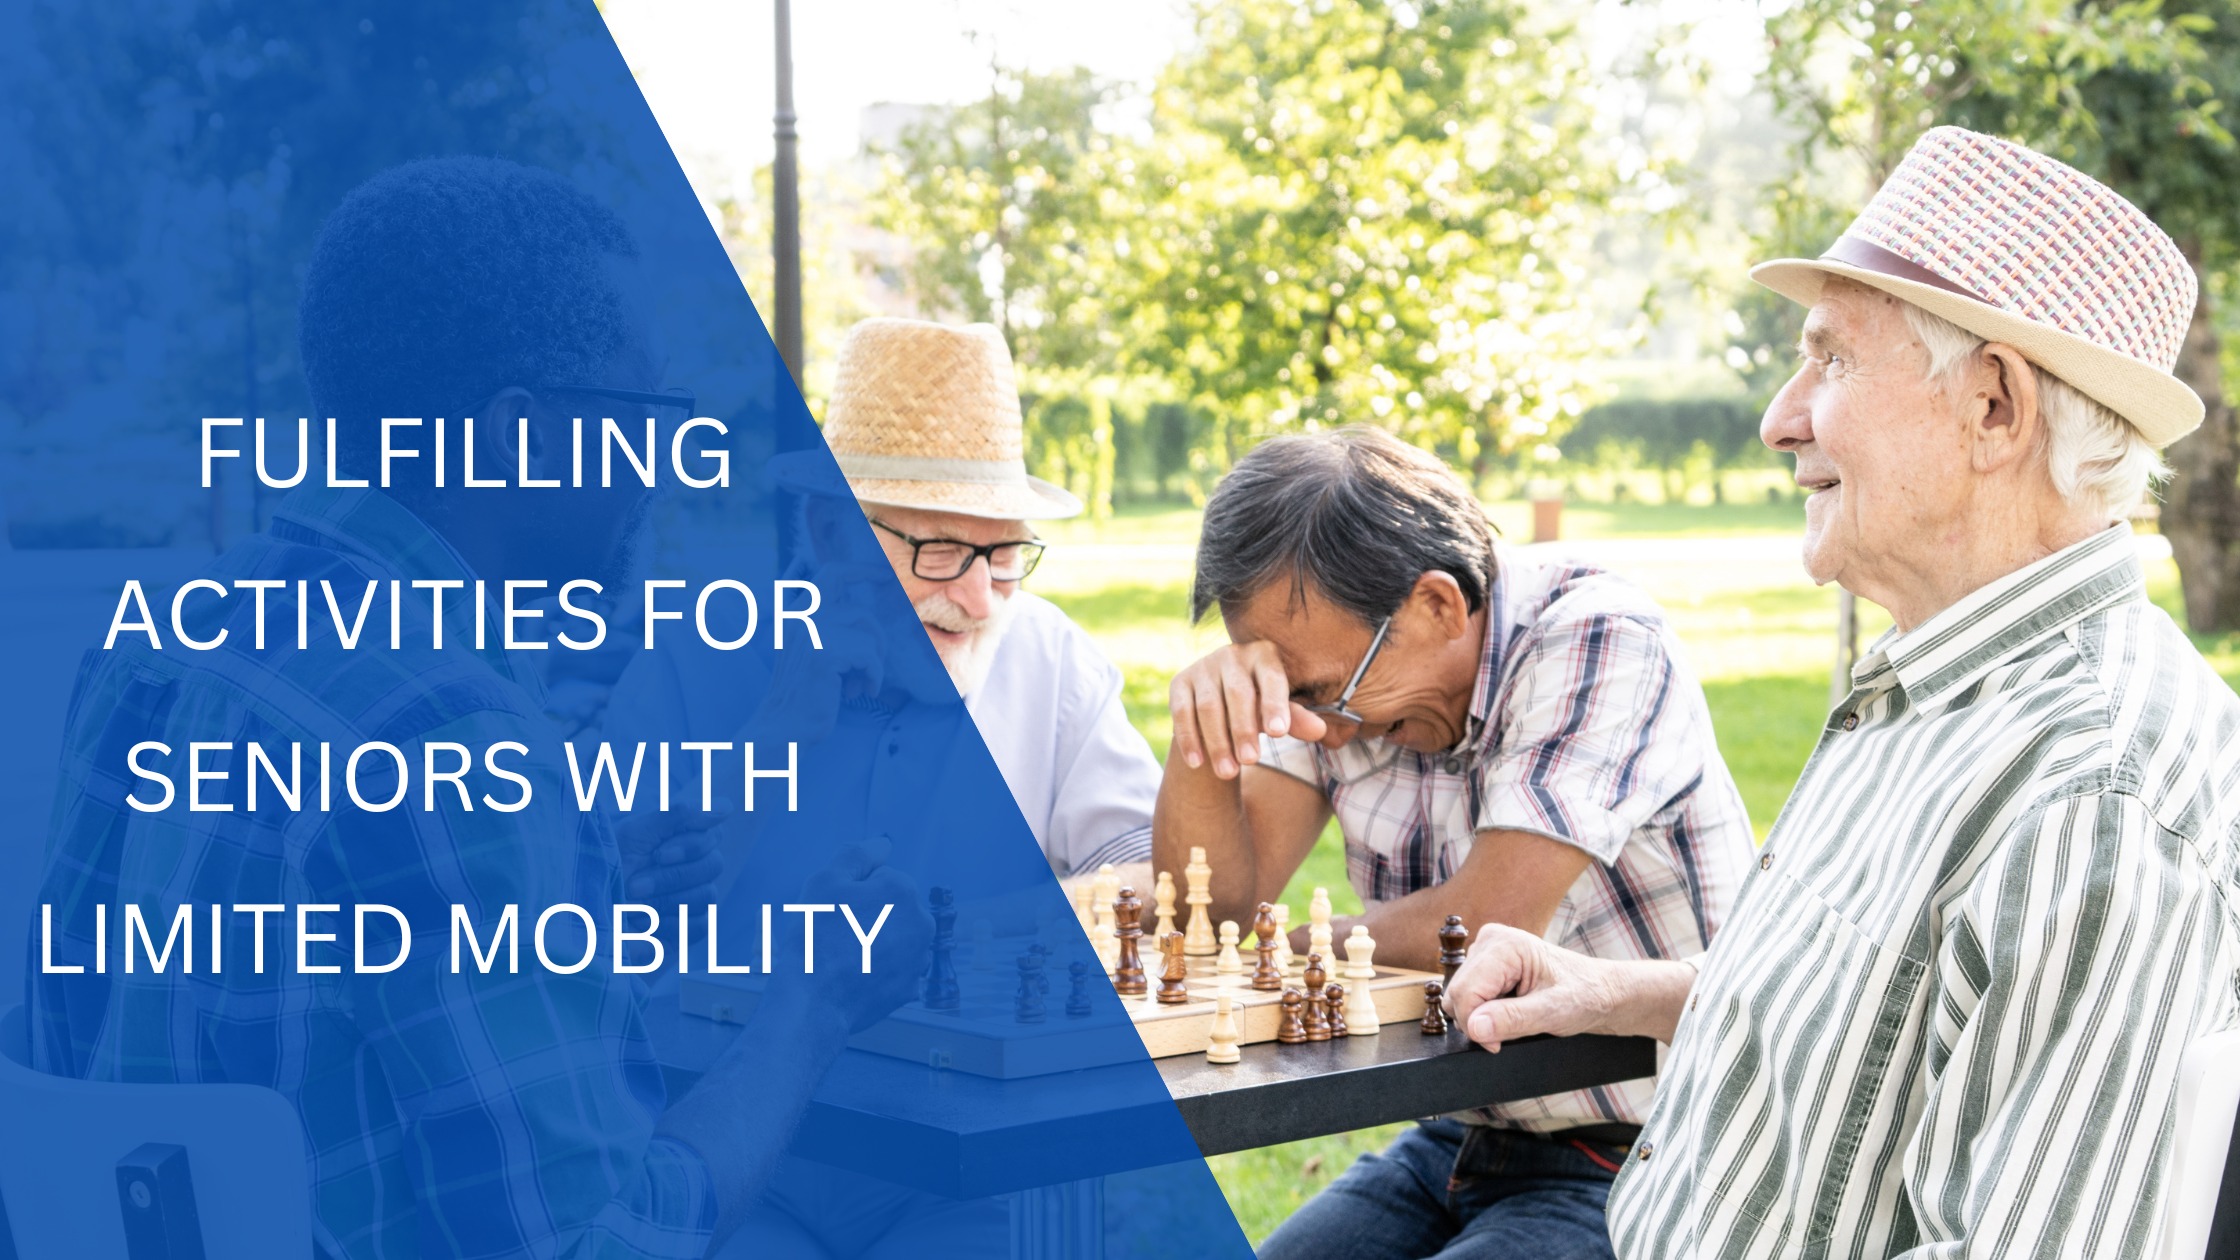 Fulfilling Activities For Seniors With Limited Mobility